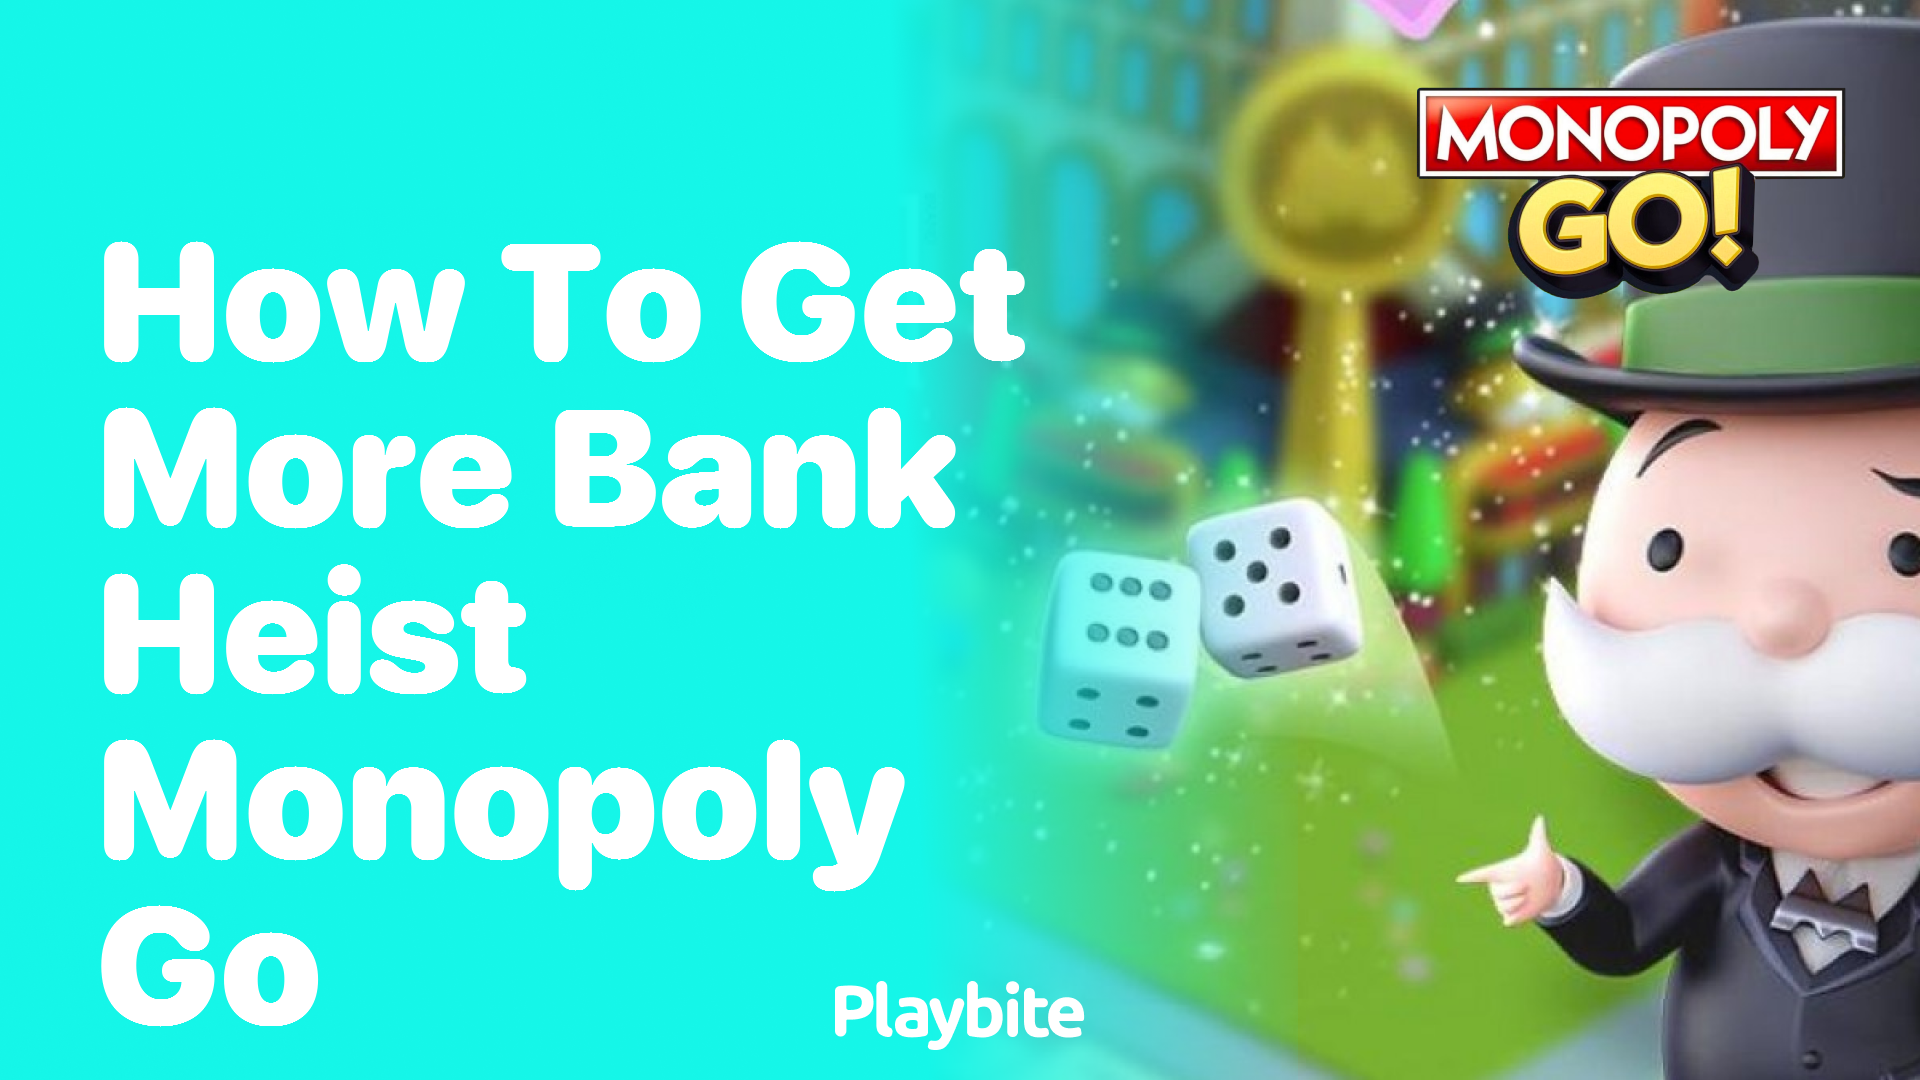 How to Get More Bank Heist in Monopoly Go